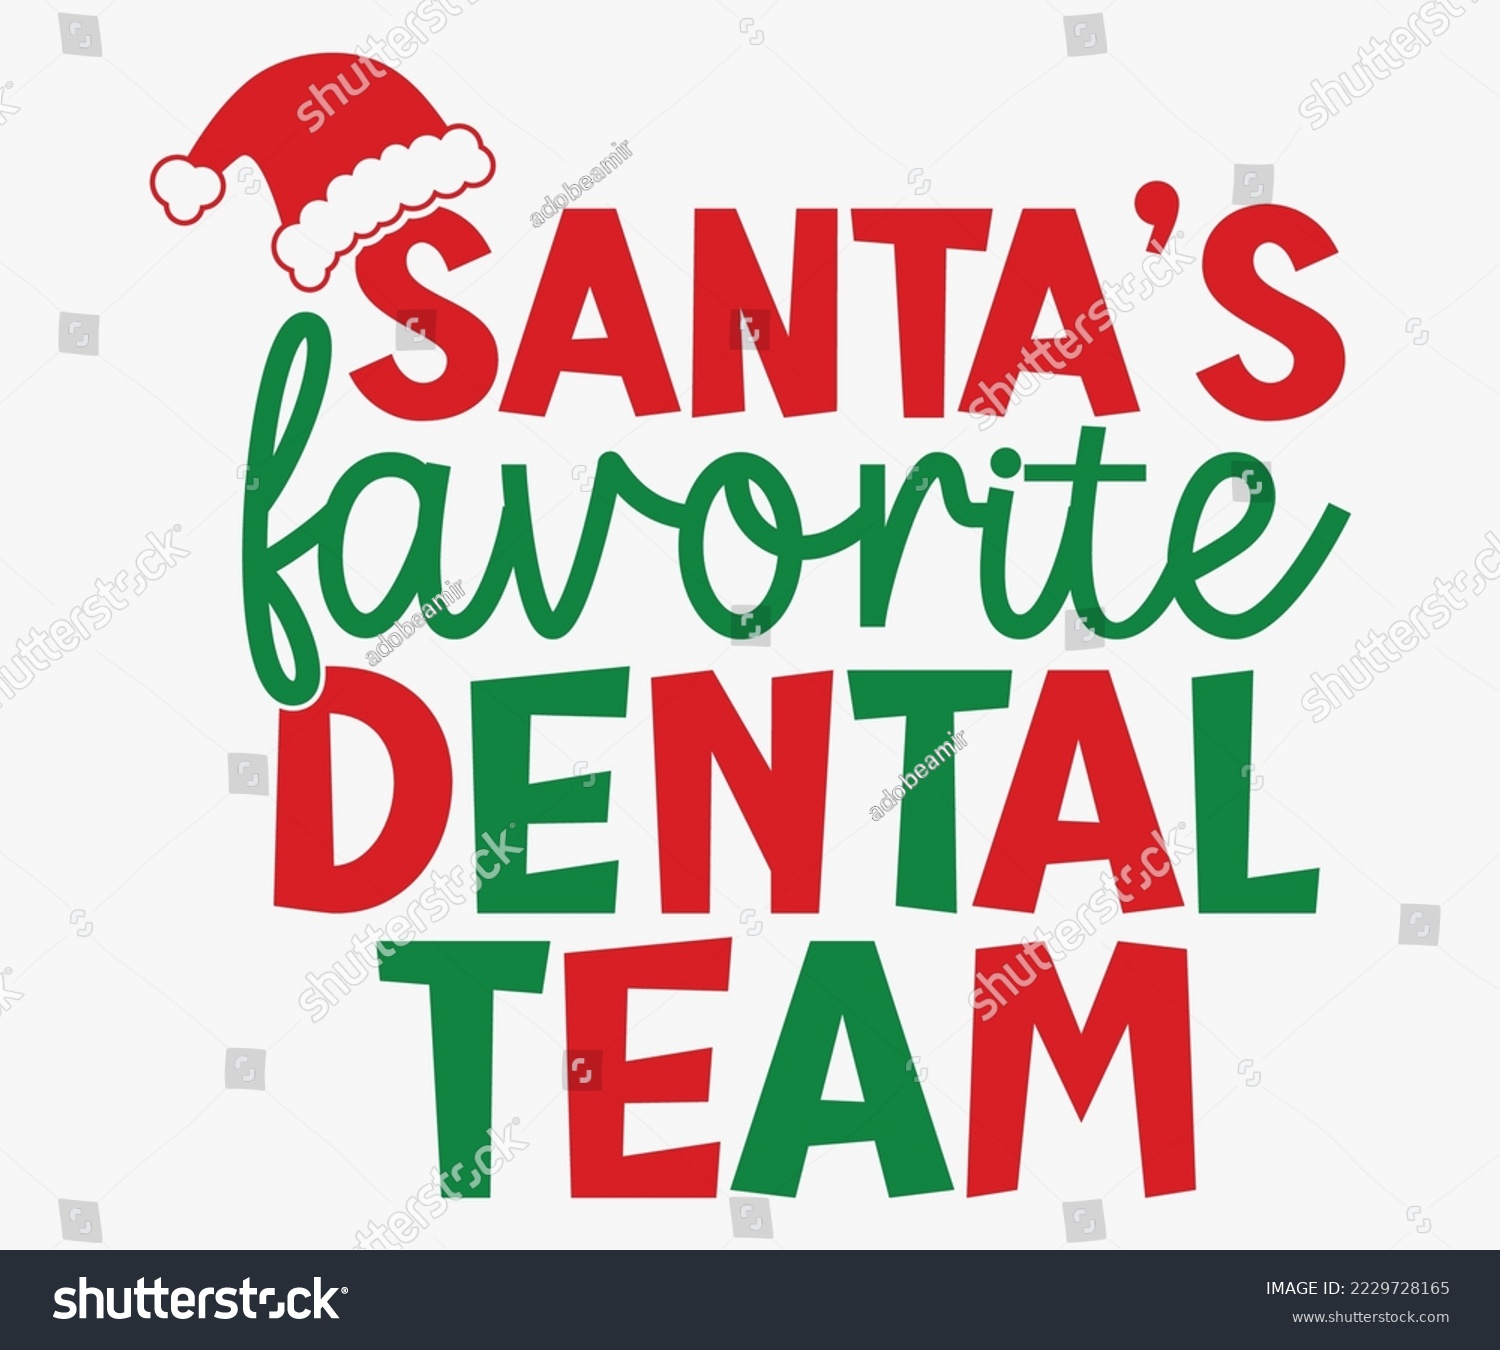 SVG of Santa's Favorite Urology Department, Office Manager, Hair Stylist, Social Worker, Medical Assistant, Mama, Dental Team, Physical Therapist, Counselor, Healthcare Worker svg